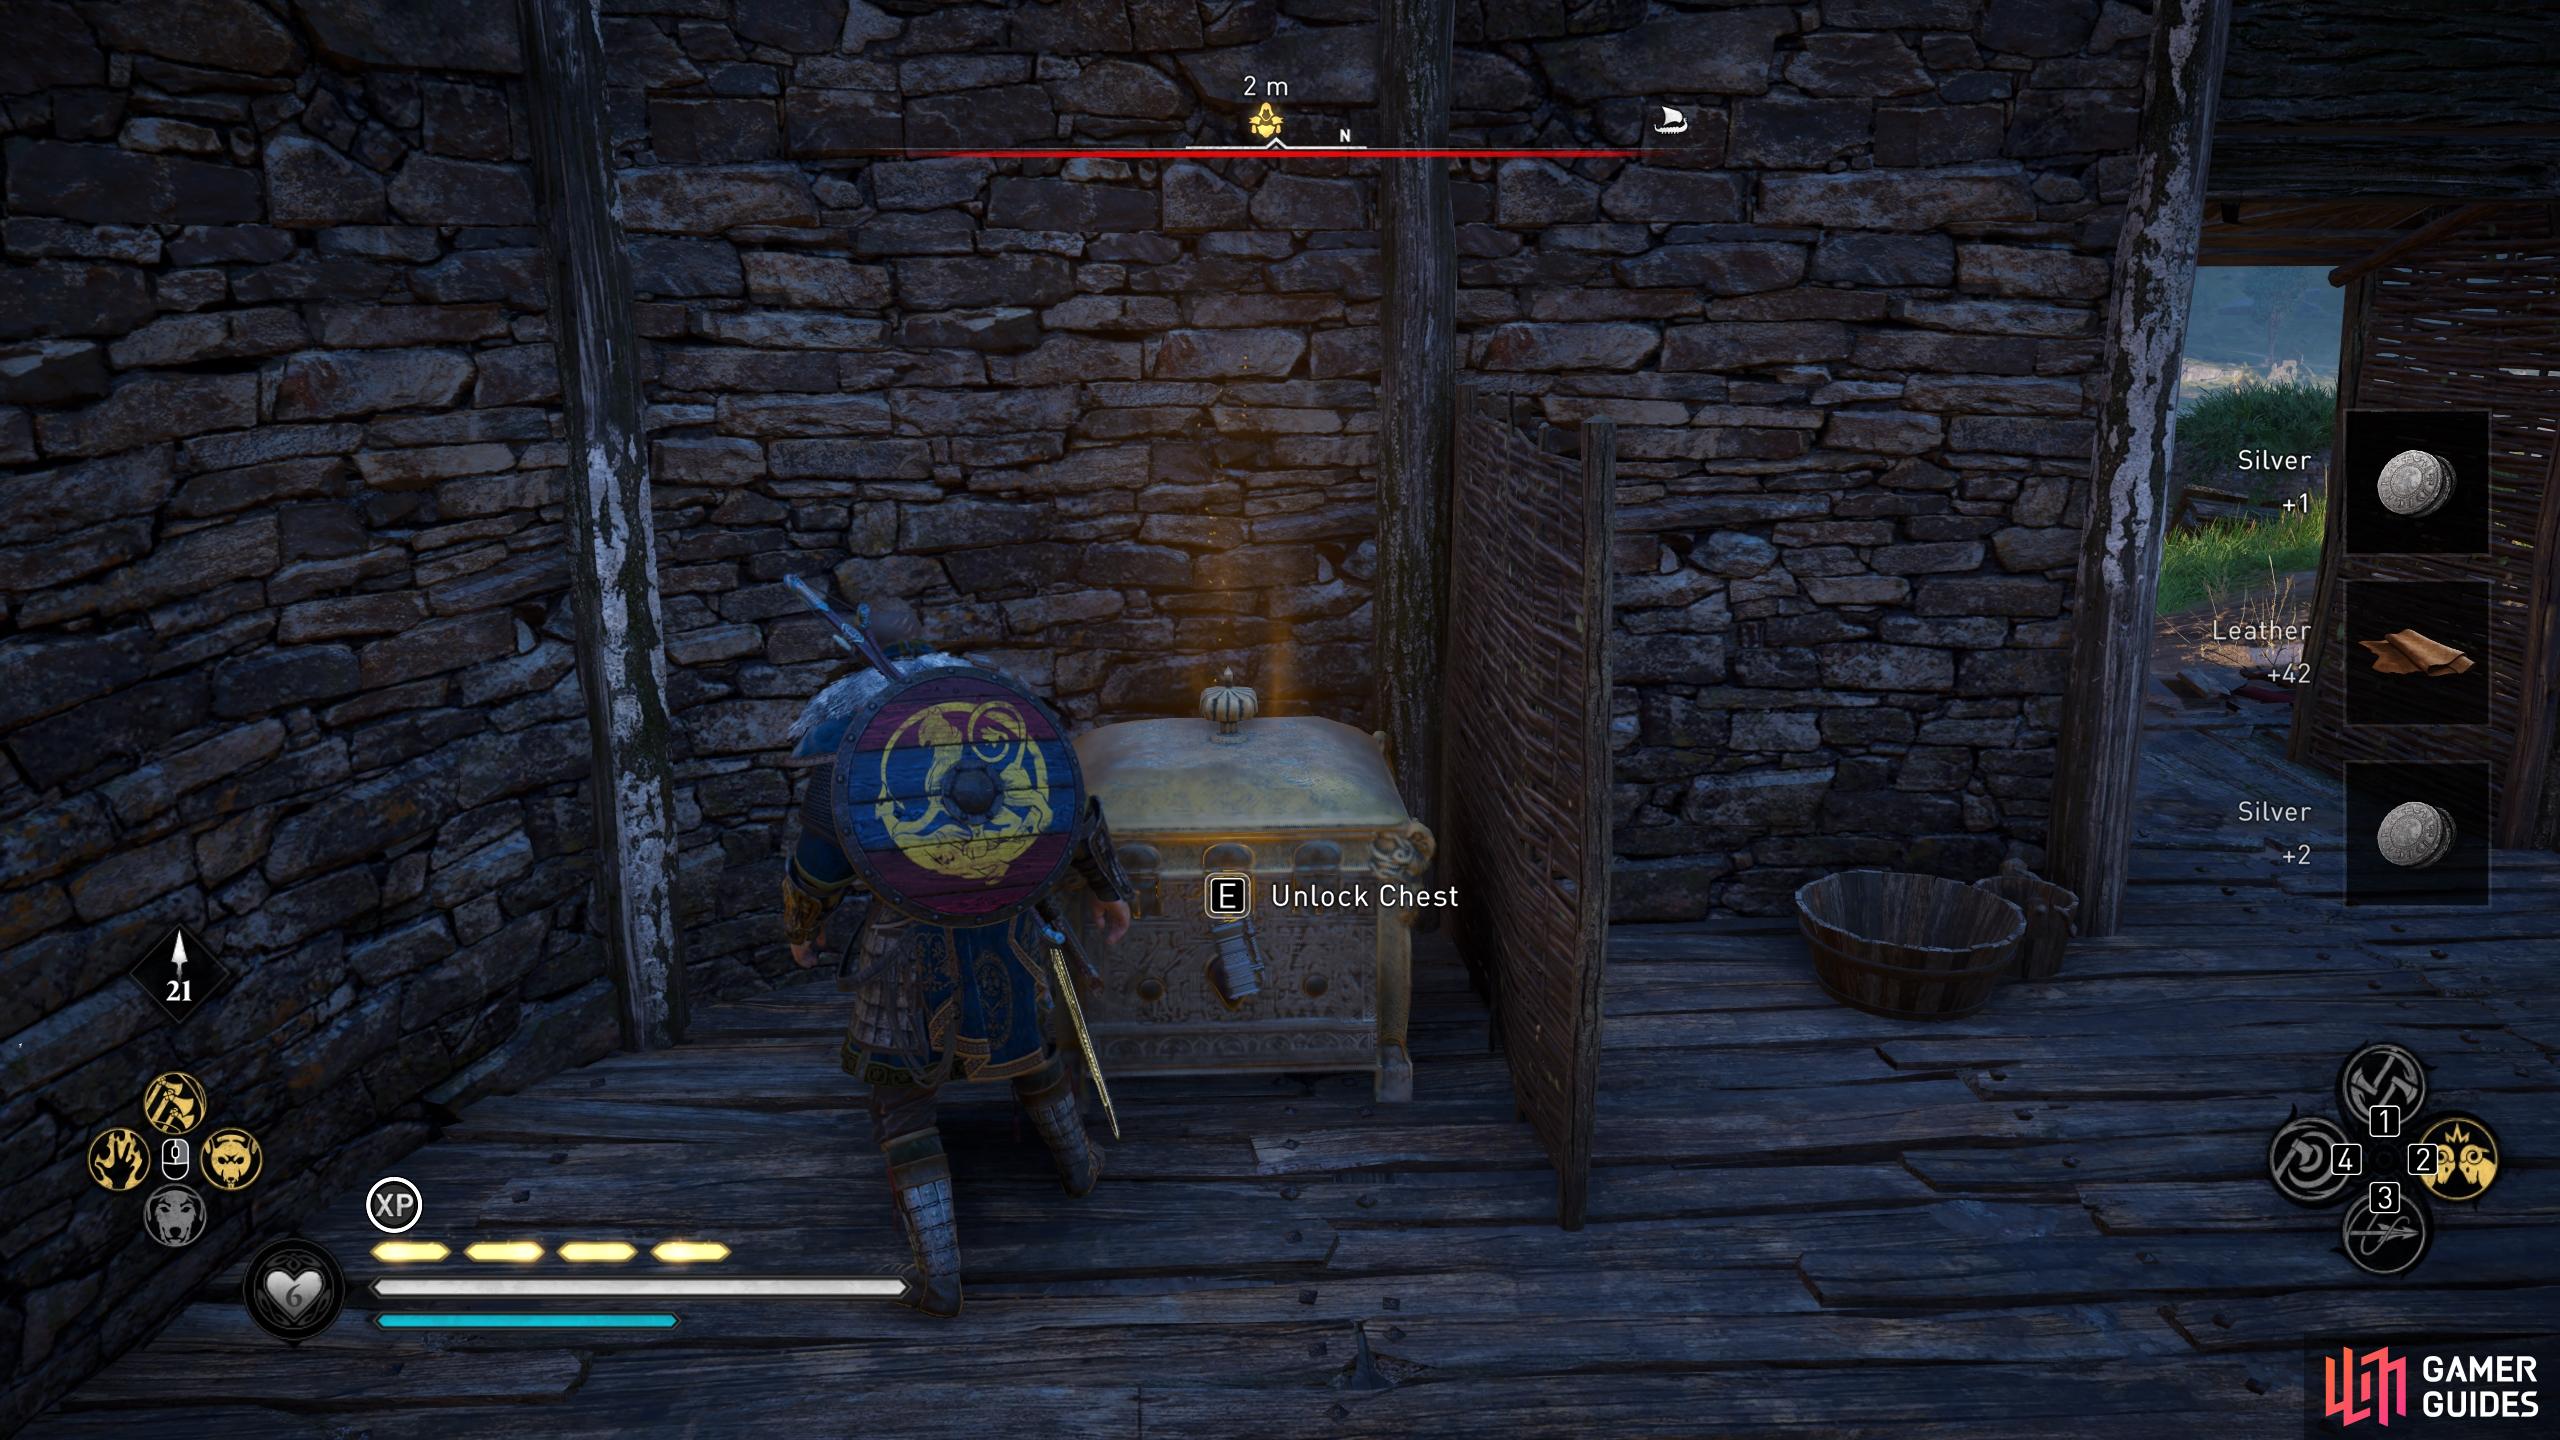 Youll find the chest in a small building within the camp.